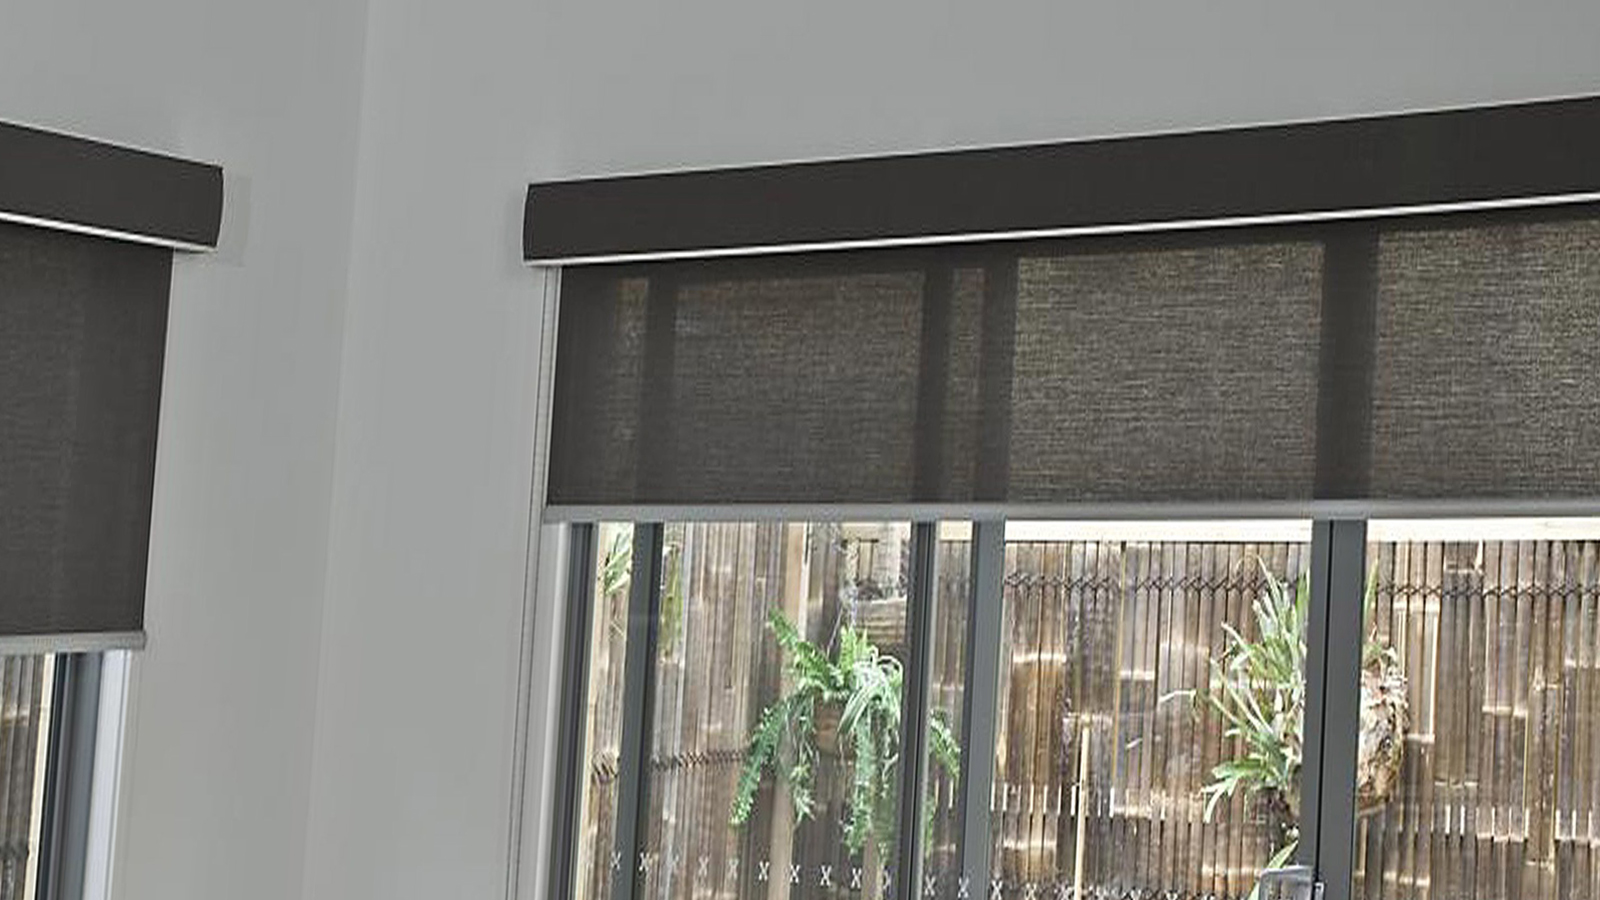 Awesome Blinds - Biggest Blinds & Shutters Store In Melbourne | 15 Yazaki Way, Carrum Downs, Victoria 3201 | +61 432 352 298